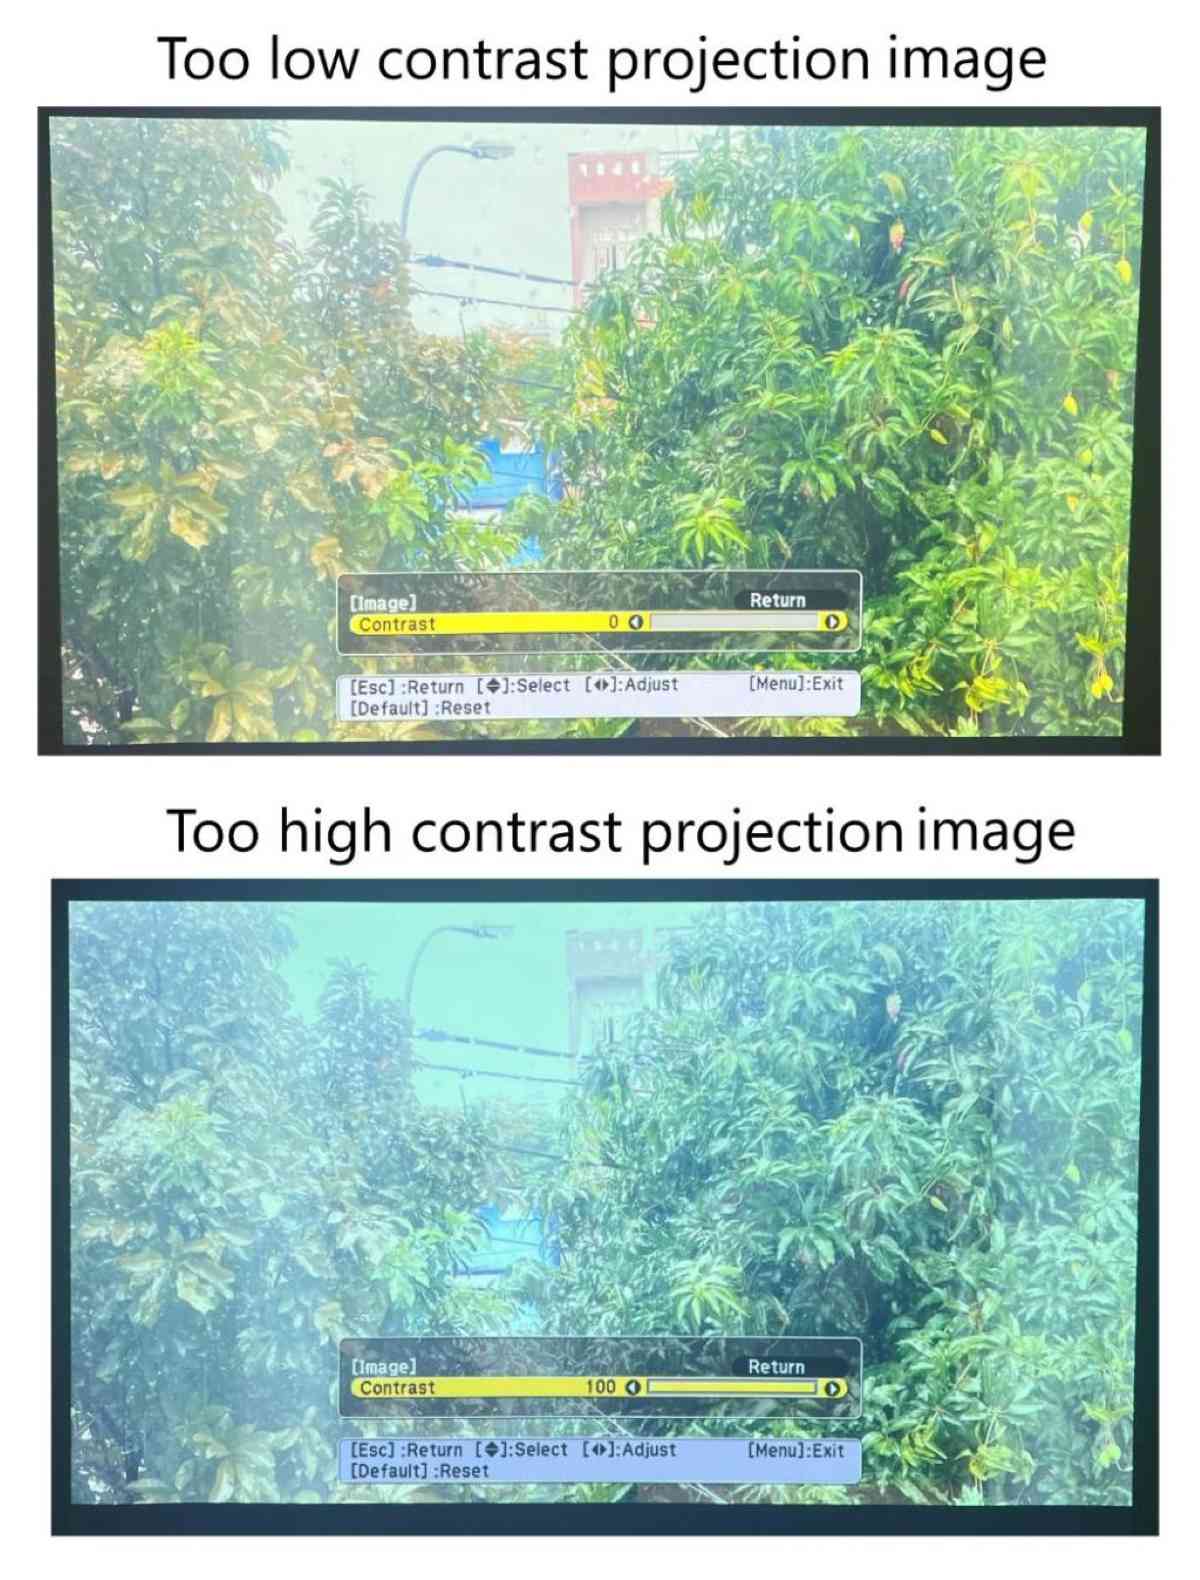 comparison between too-low and too-high contrast projection images